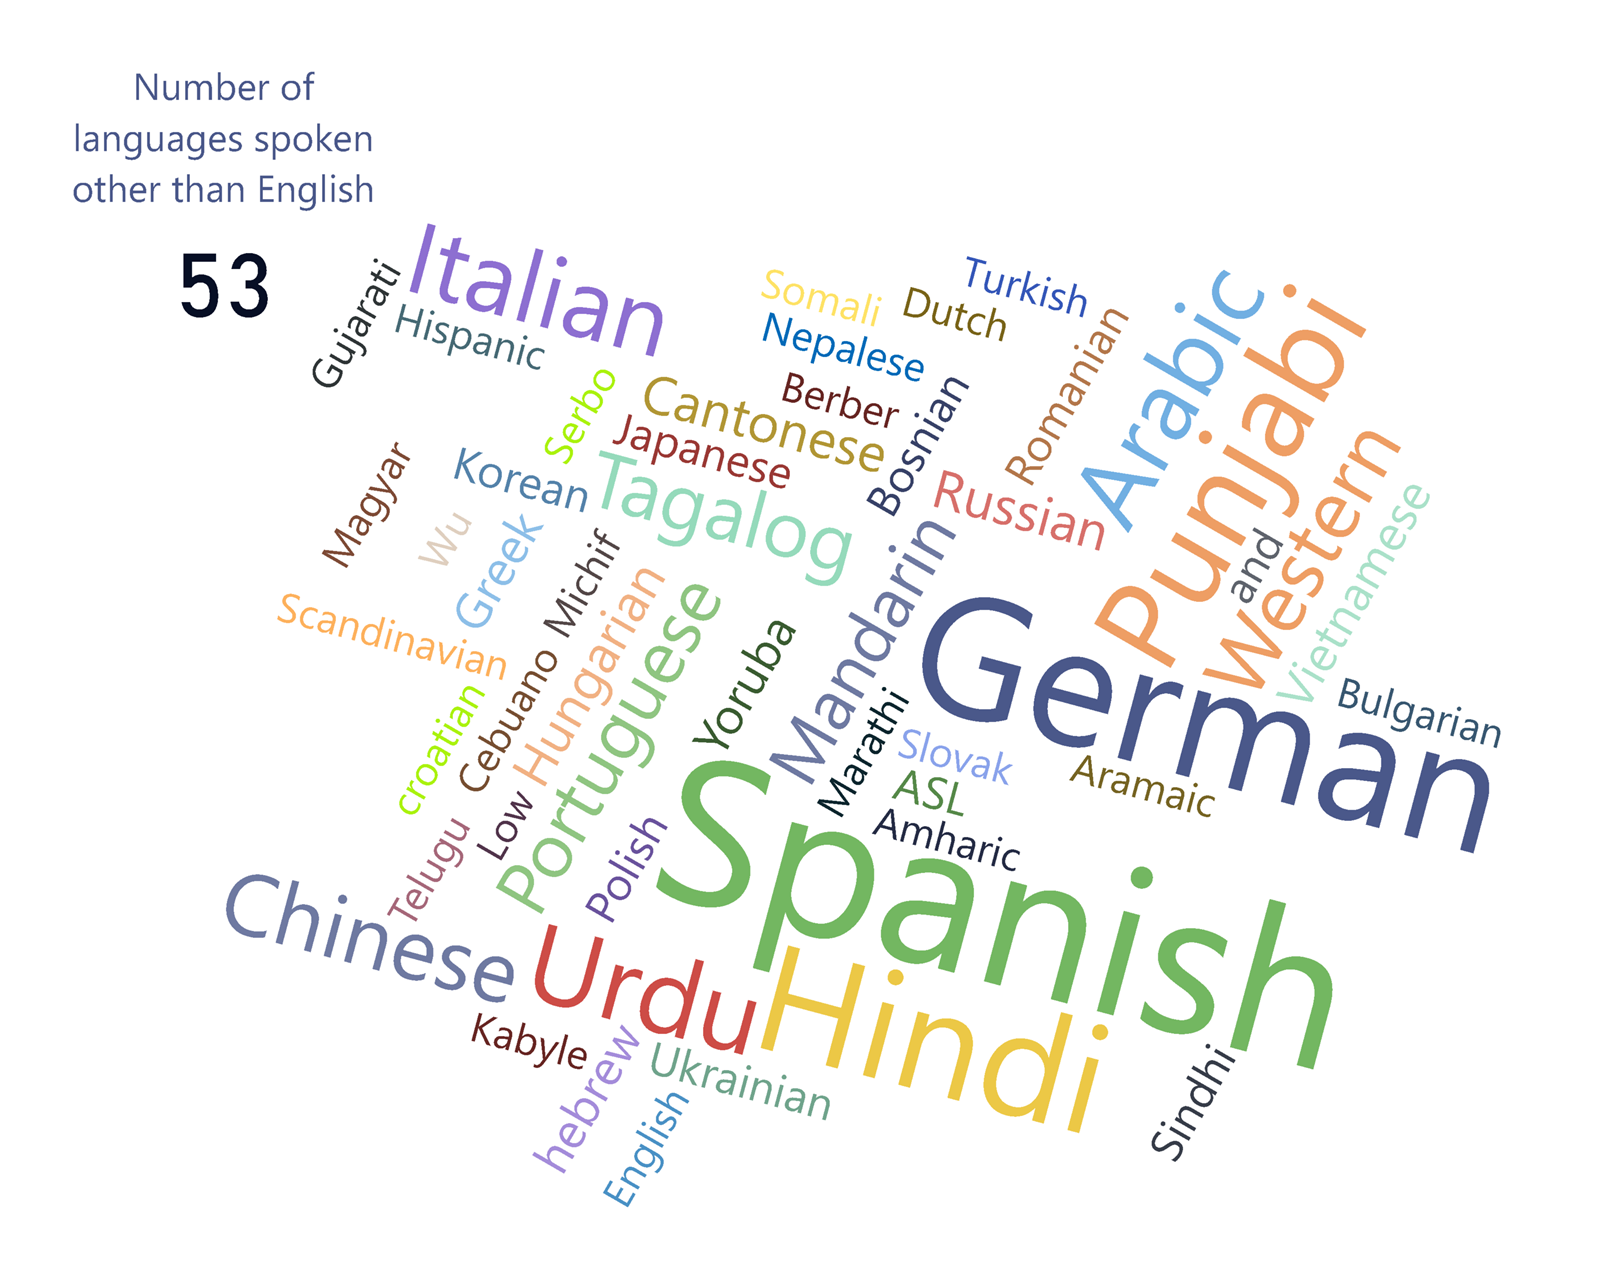 Number of languages spoken other than English 53